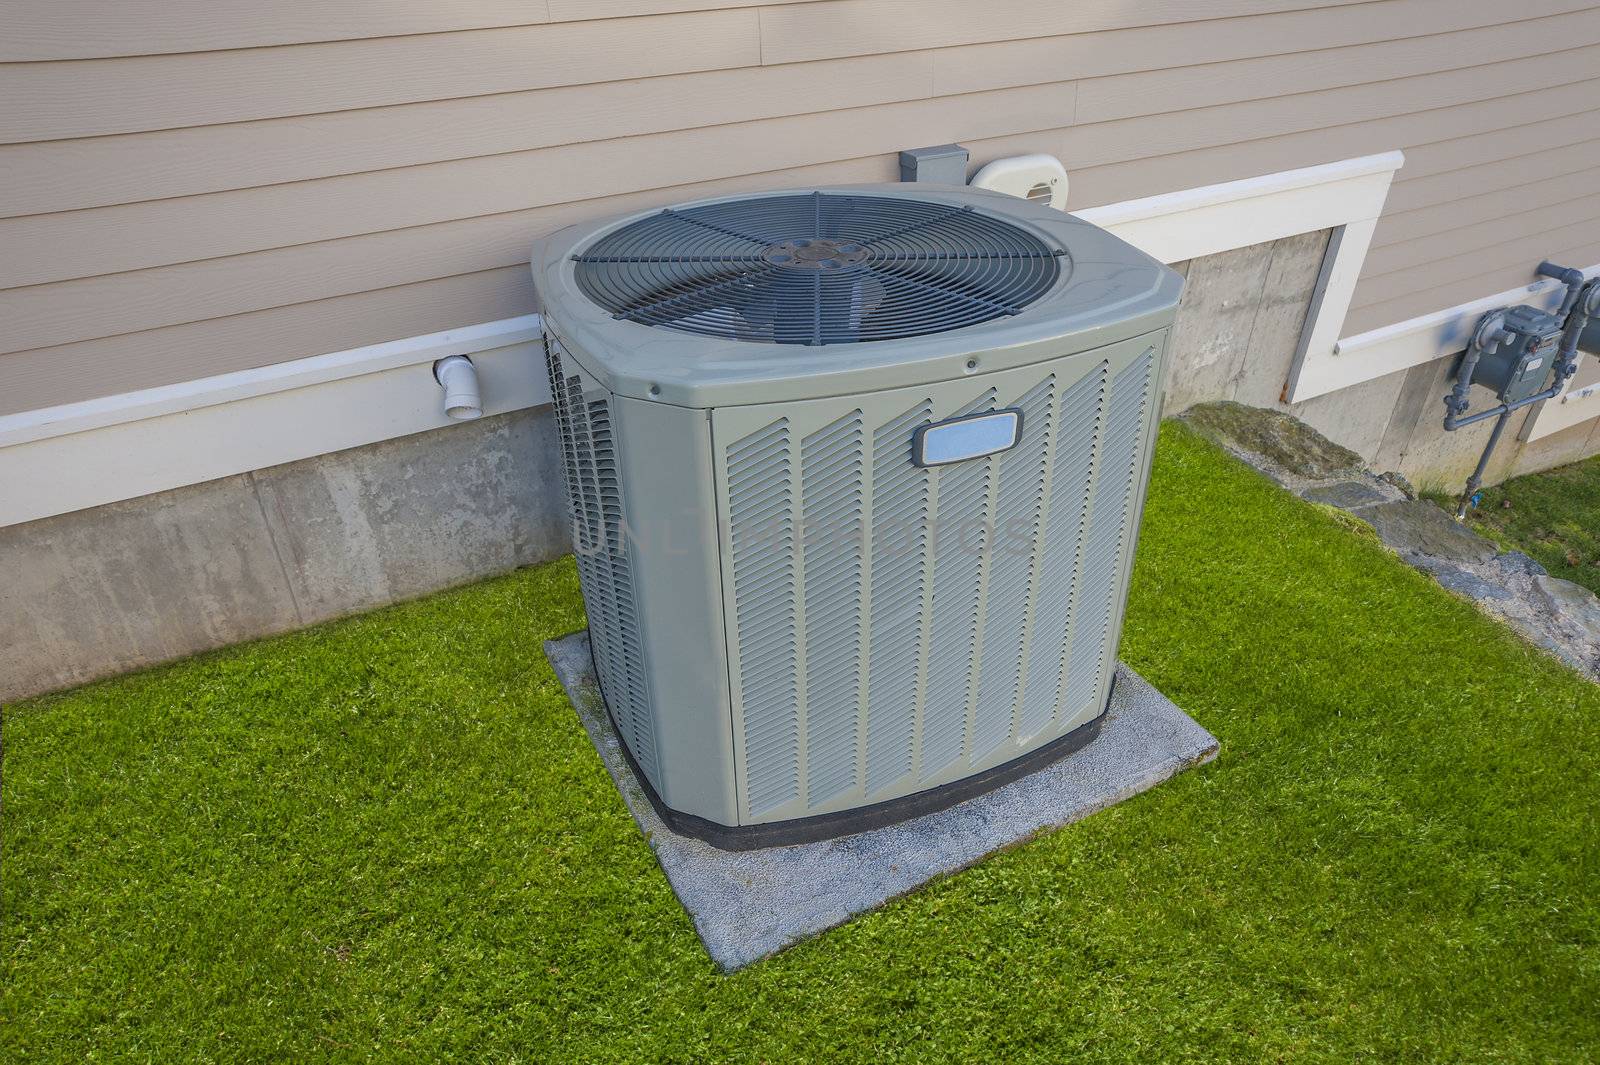 Heating and cooling unit on the side of a residential house